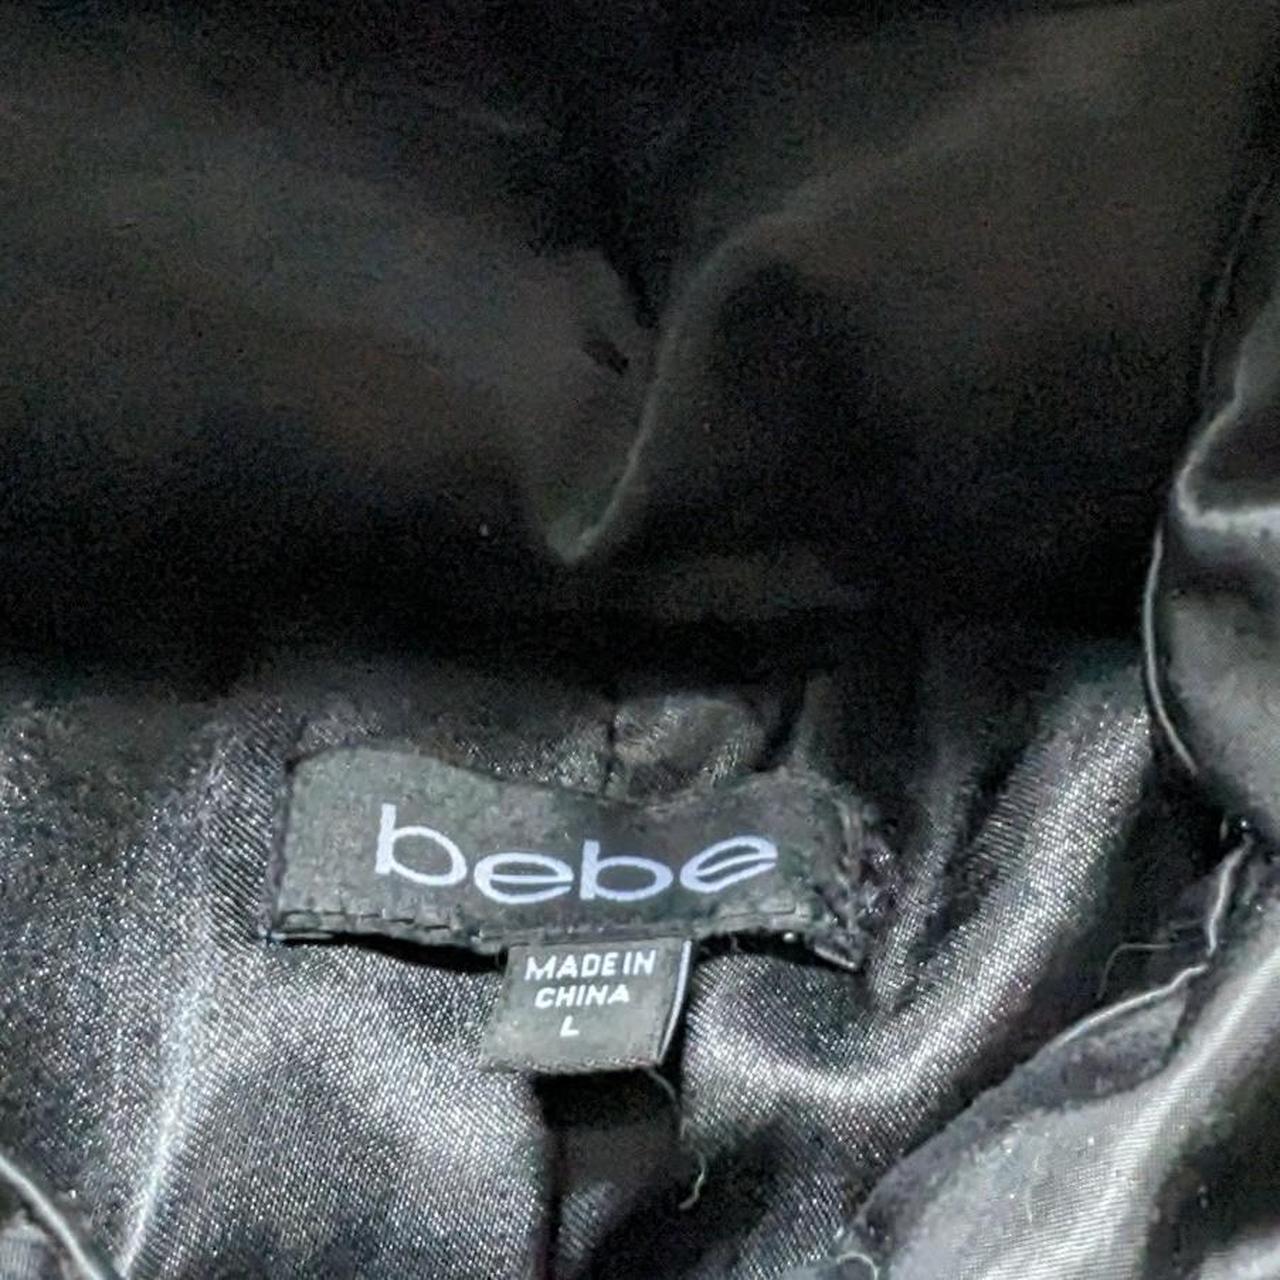 BeBe Black Trench Puffer Coat 🖤 The perfect going... - Depop